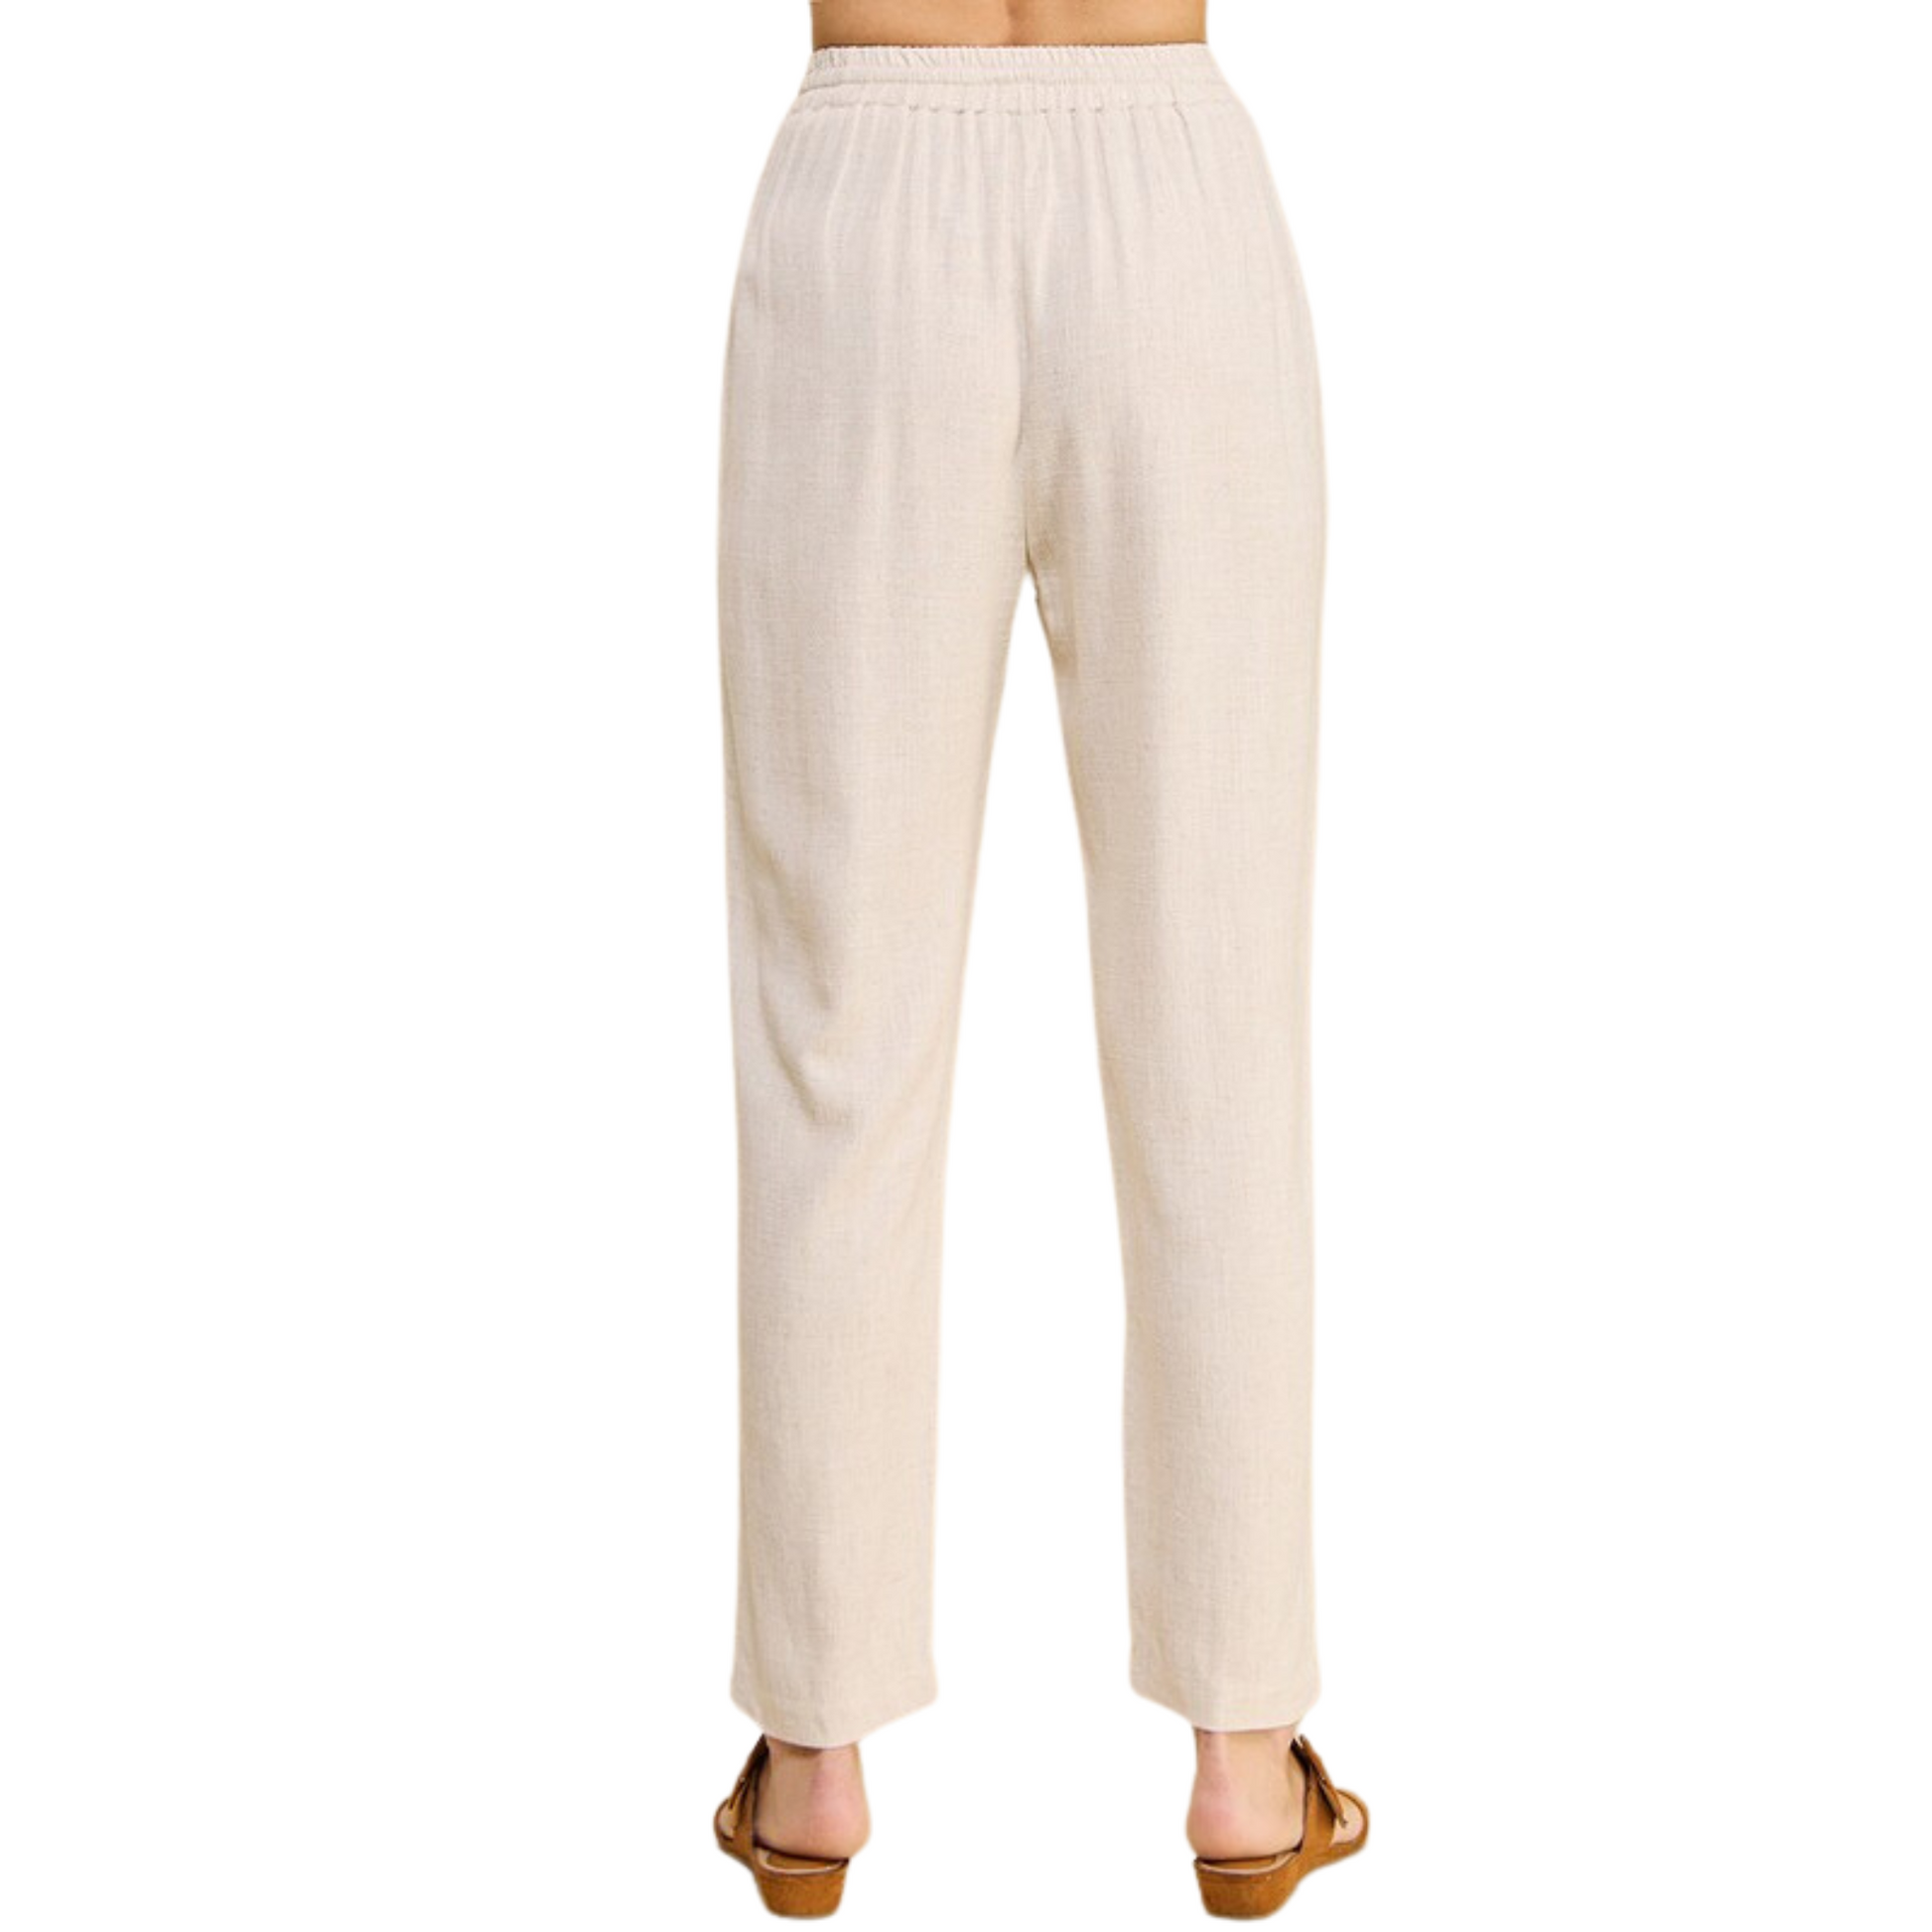 Our Elastic Waist Soft Linen Pants are the perfect blend of comfort and style. Crafted from lightweight and breathable linen blend fabric with an elastic waistband and cropped length, they are an ideal addition to any modern wardrobe. Choose from black or natural colors.